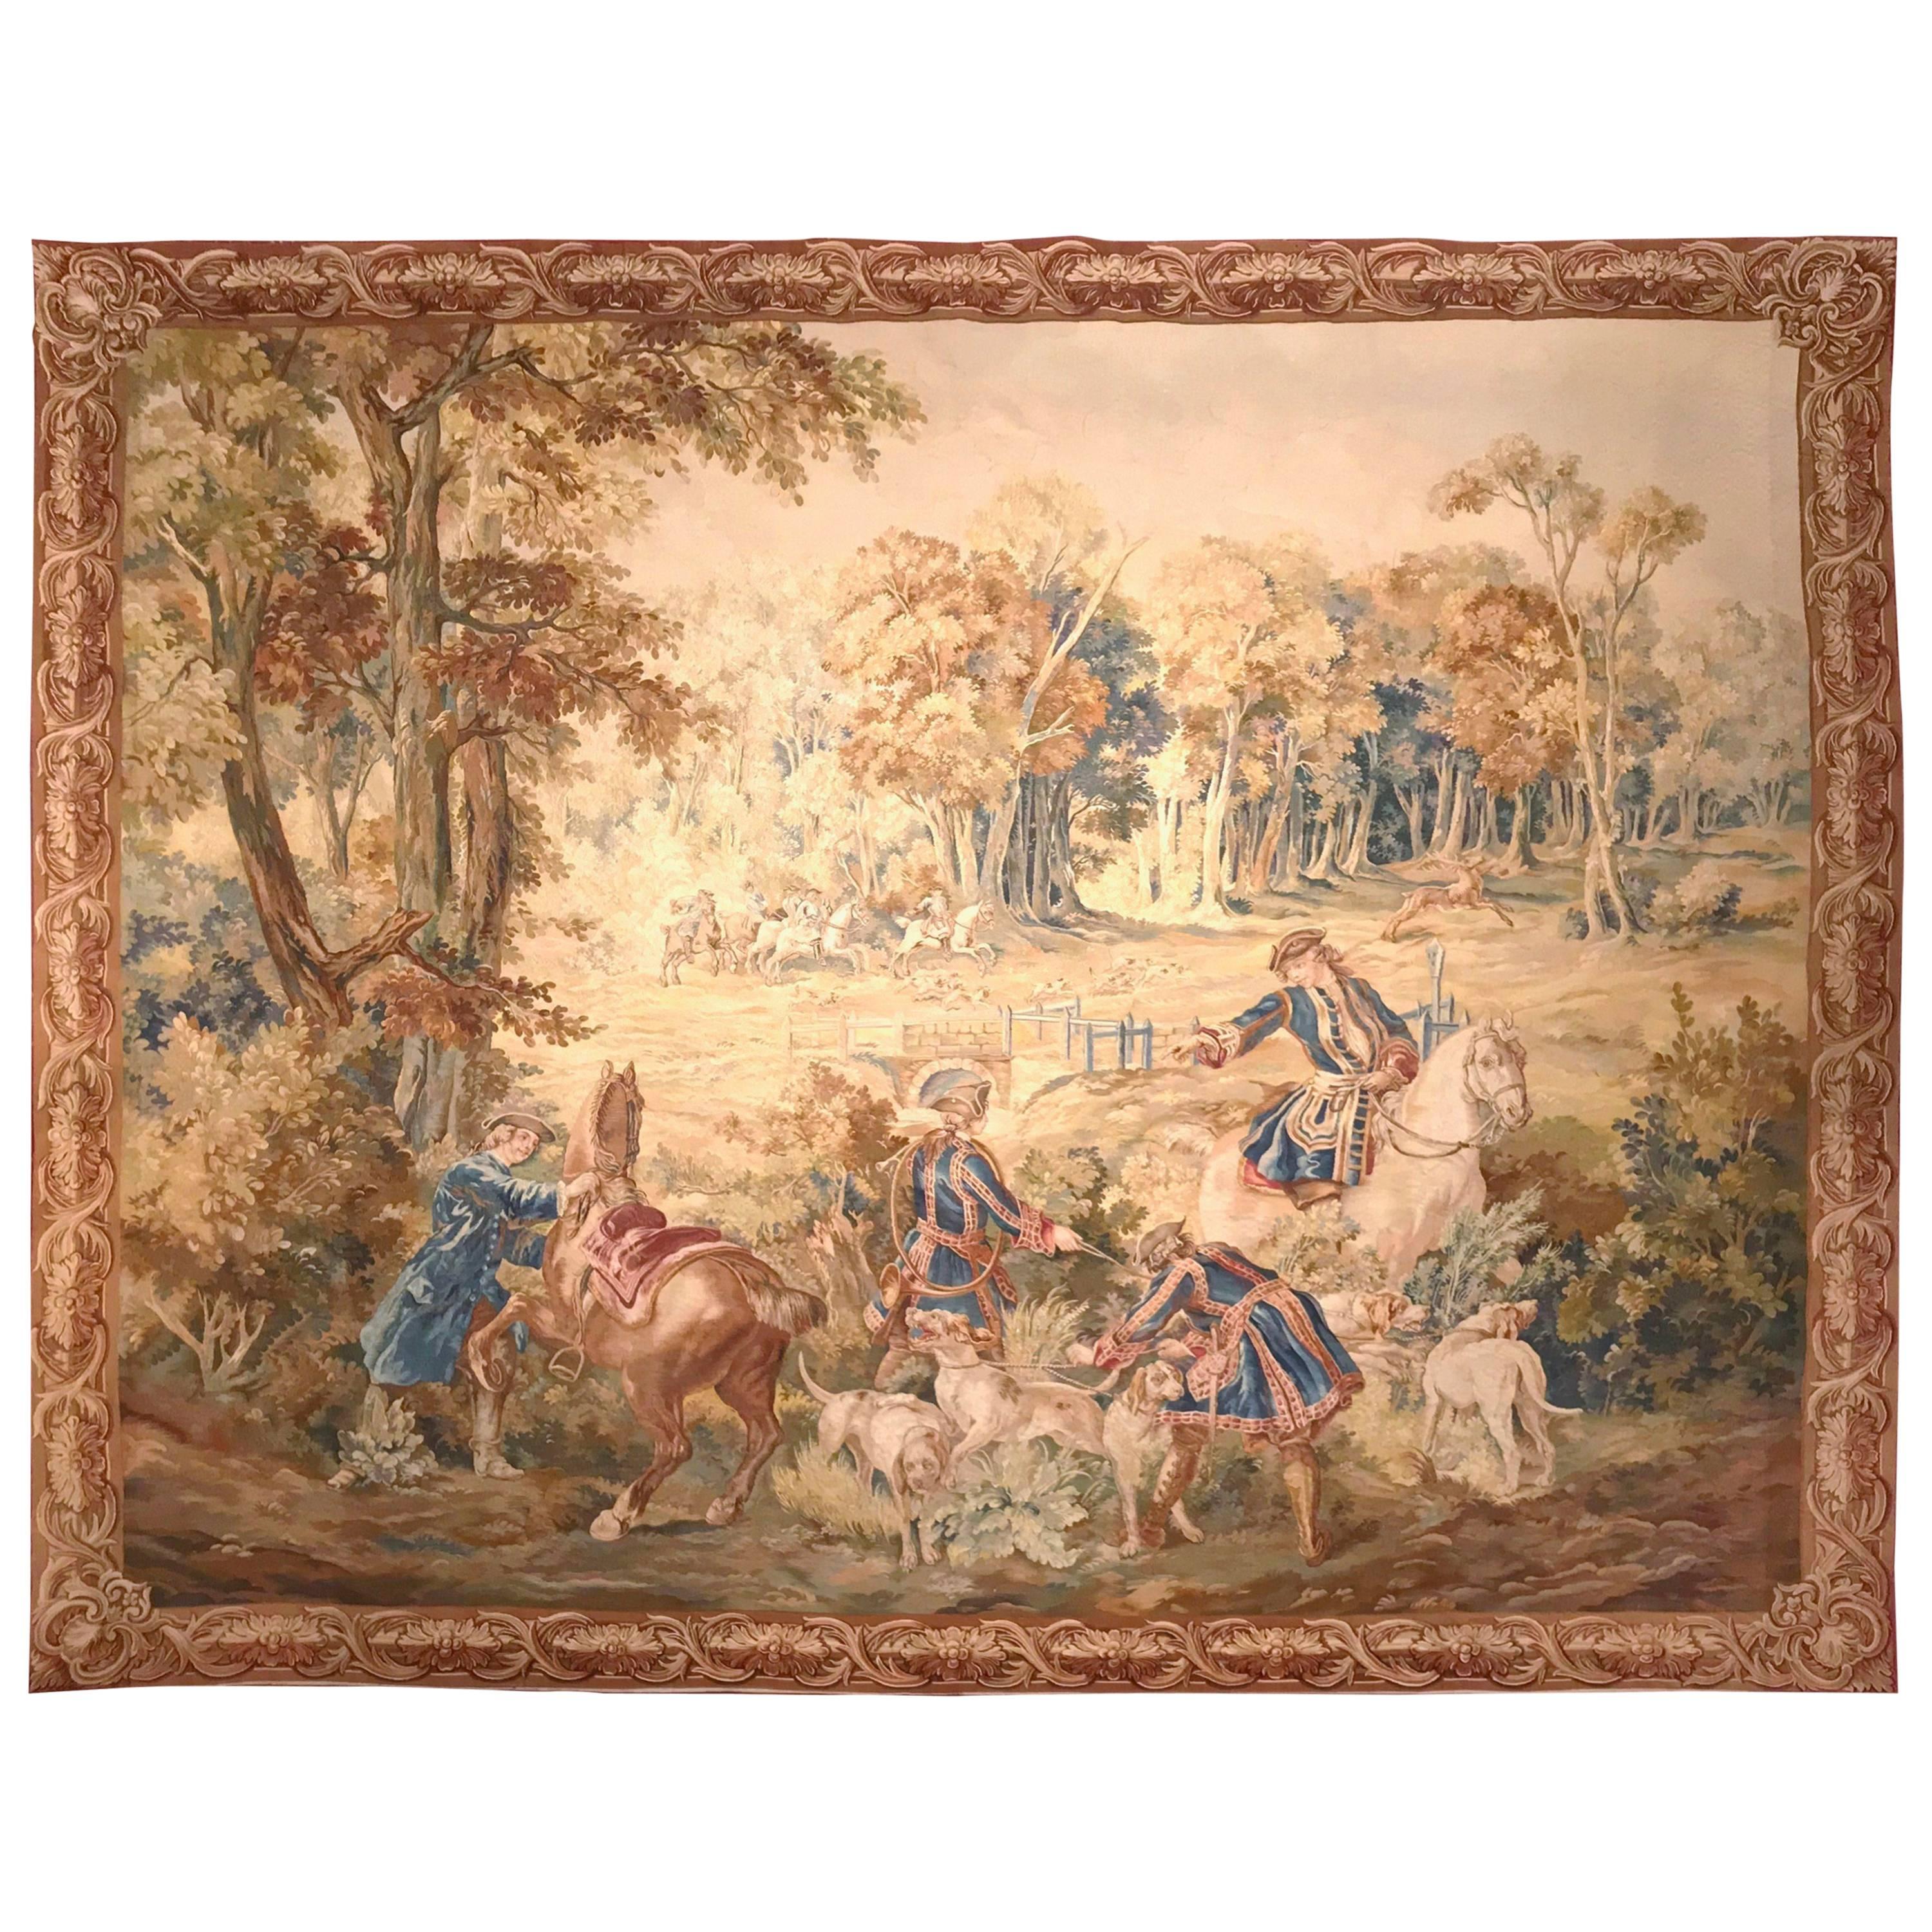 Large 18th Century Hunt Scene Tapestry with Horsemen Dogs and Deer from Brussels